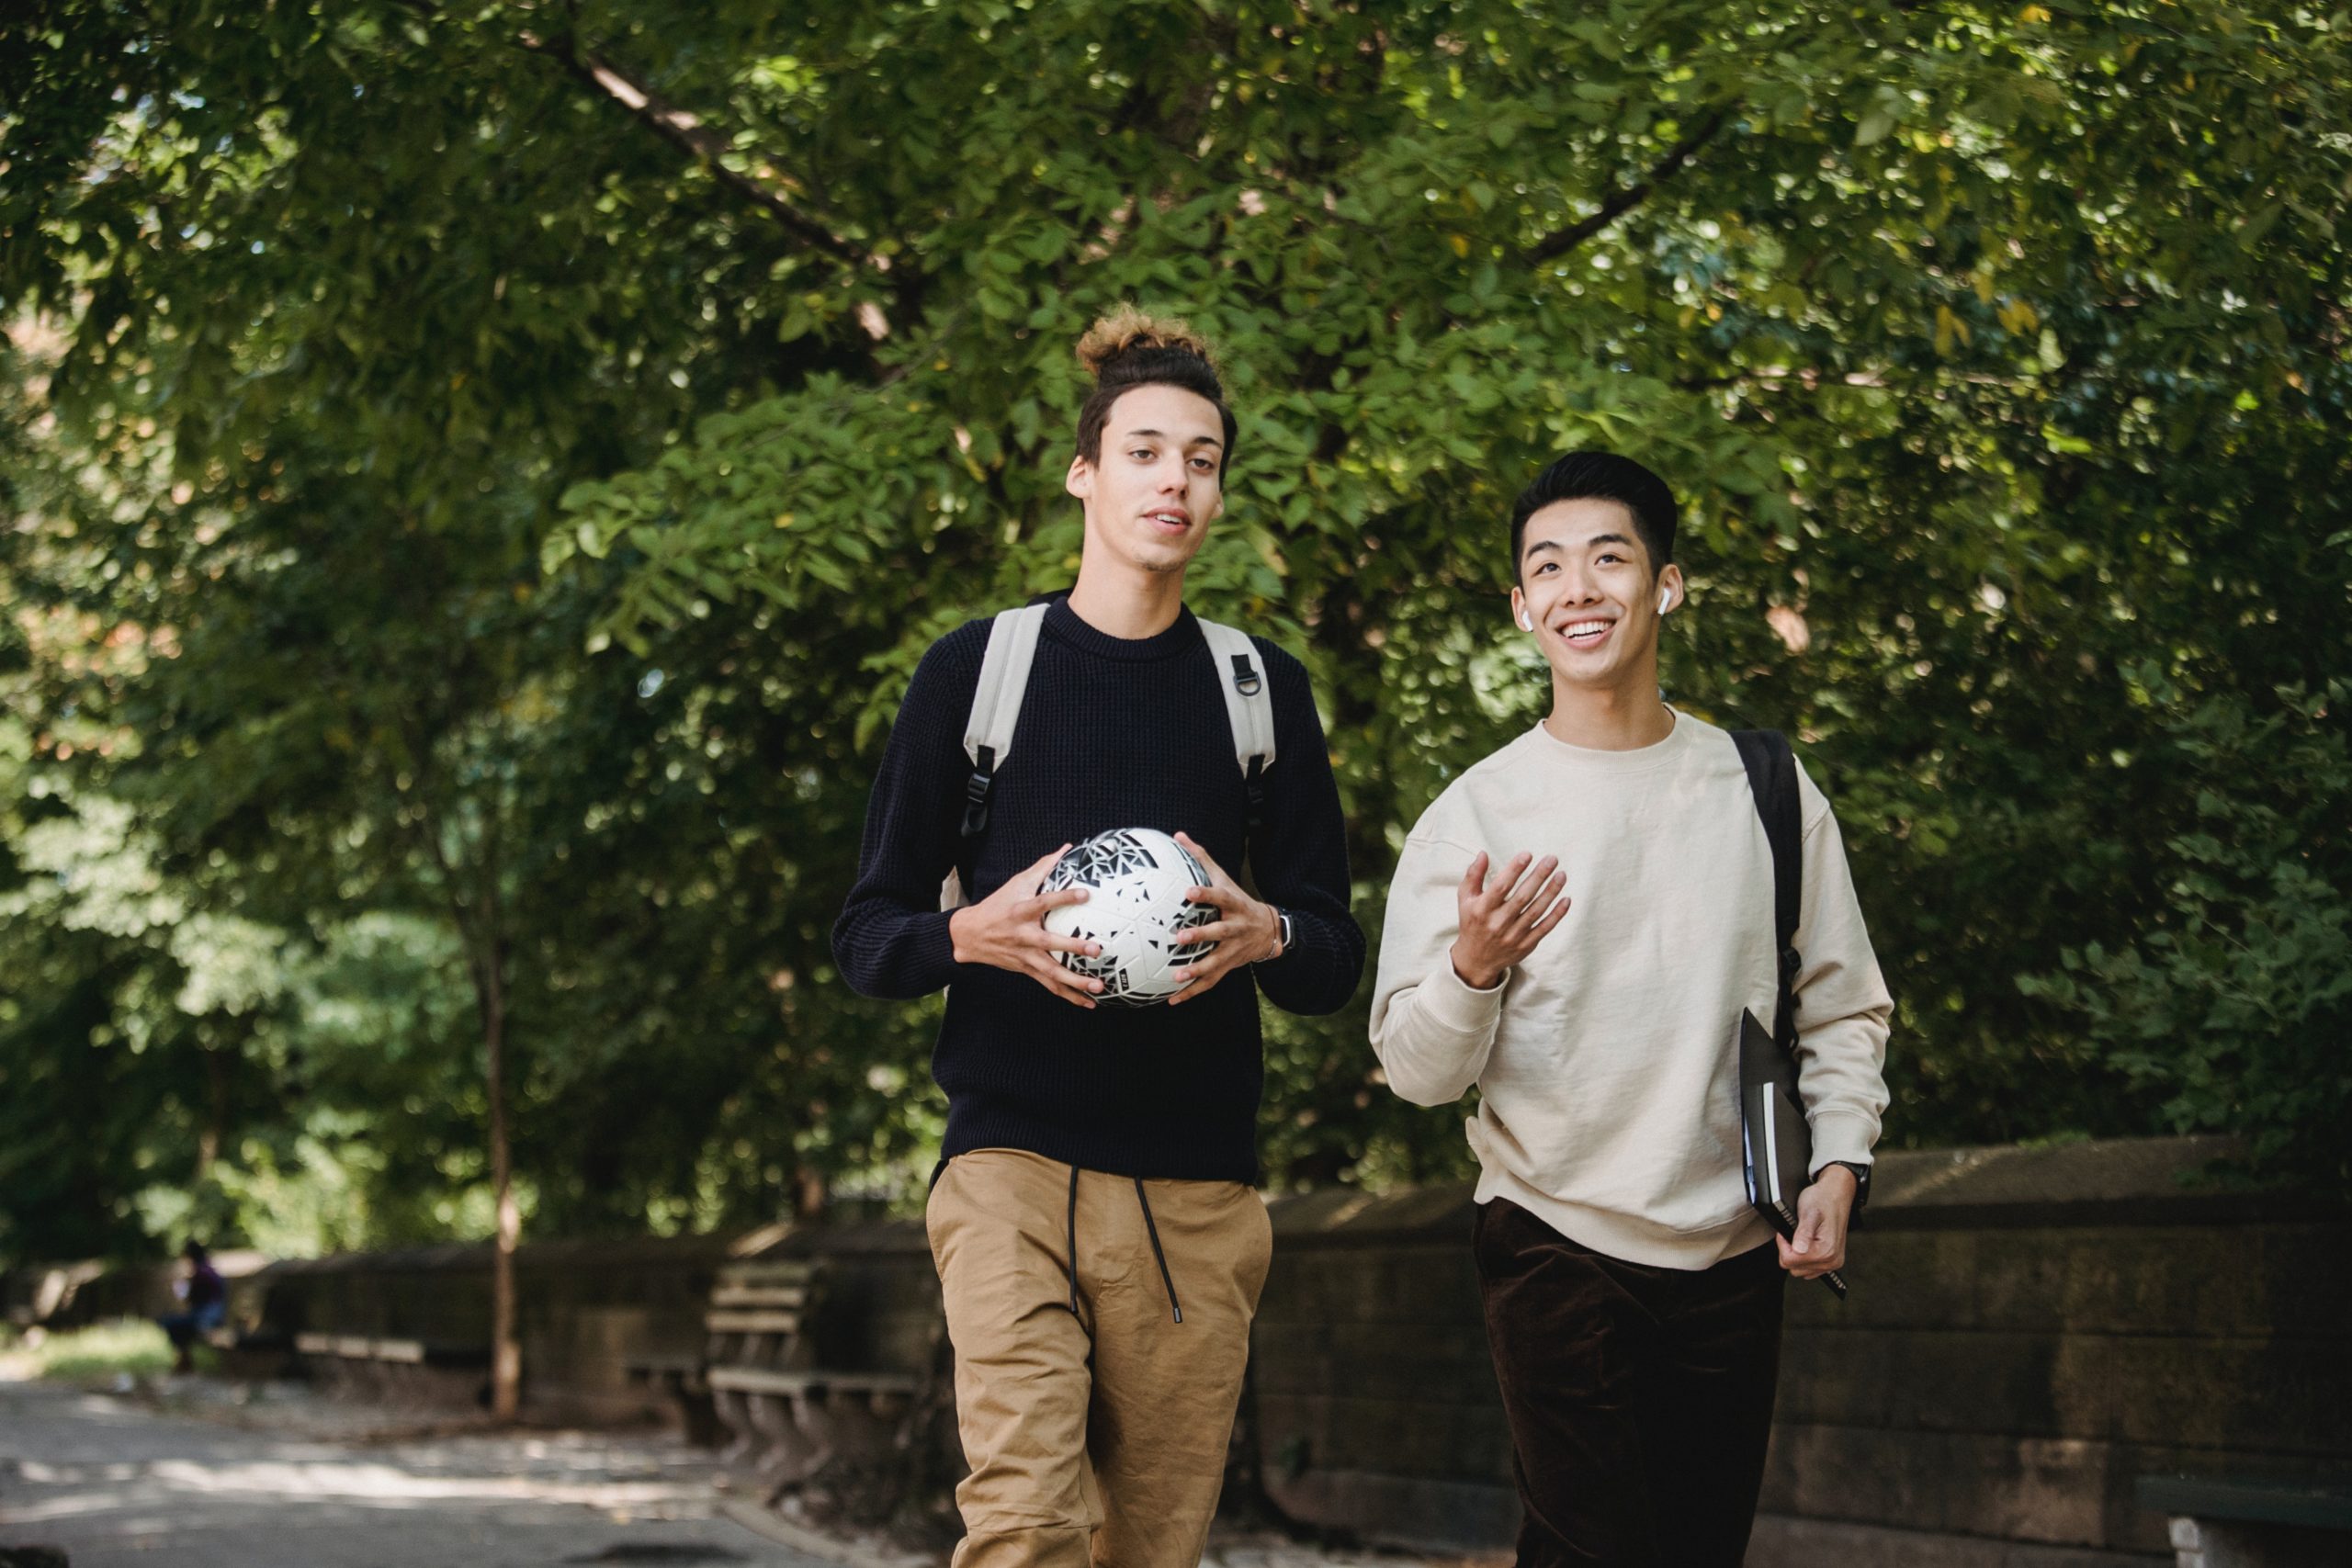 Can The Friends You Have Influence Your Soccer Skills?